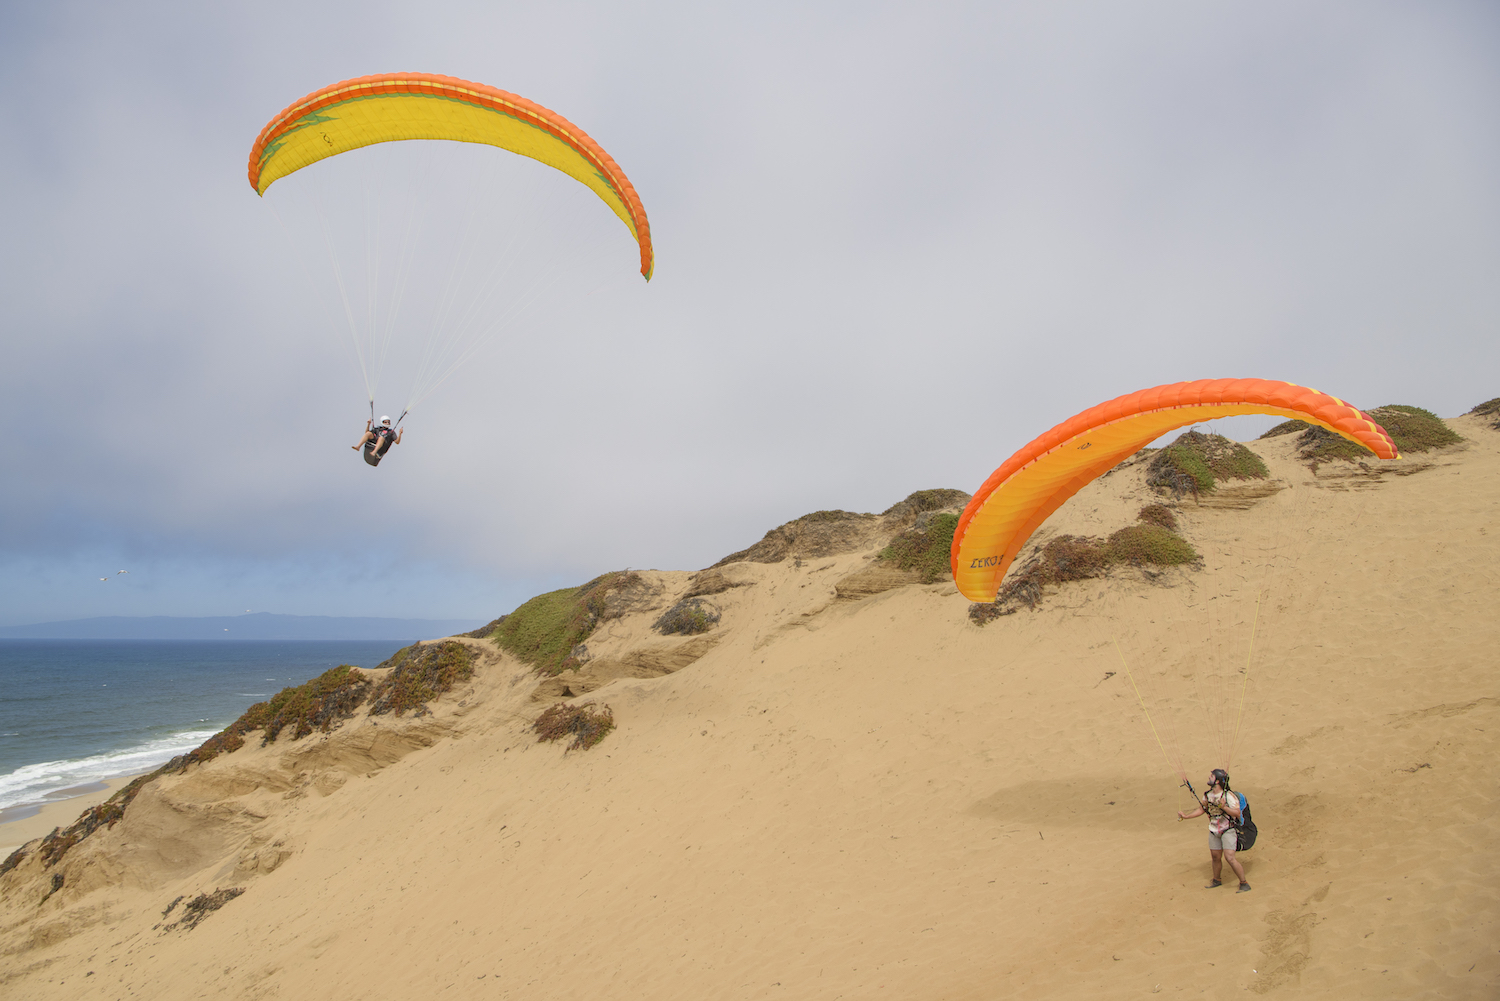 Two people on a beach wearing paraglides. One is in the air while one is on the ground.